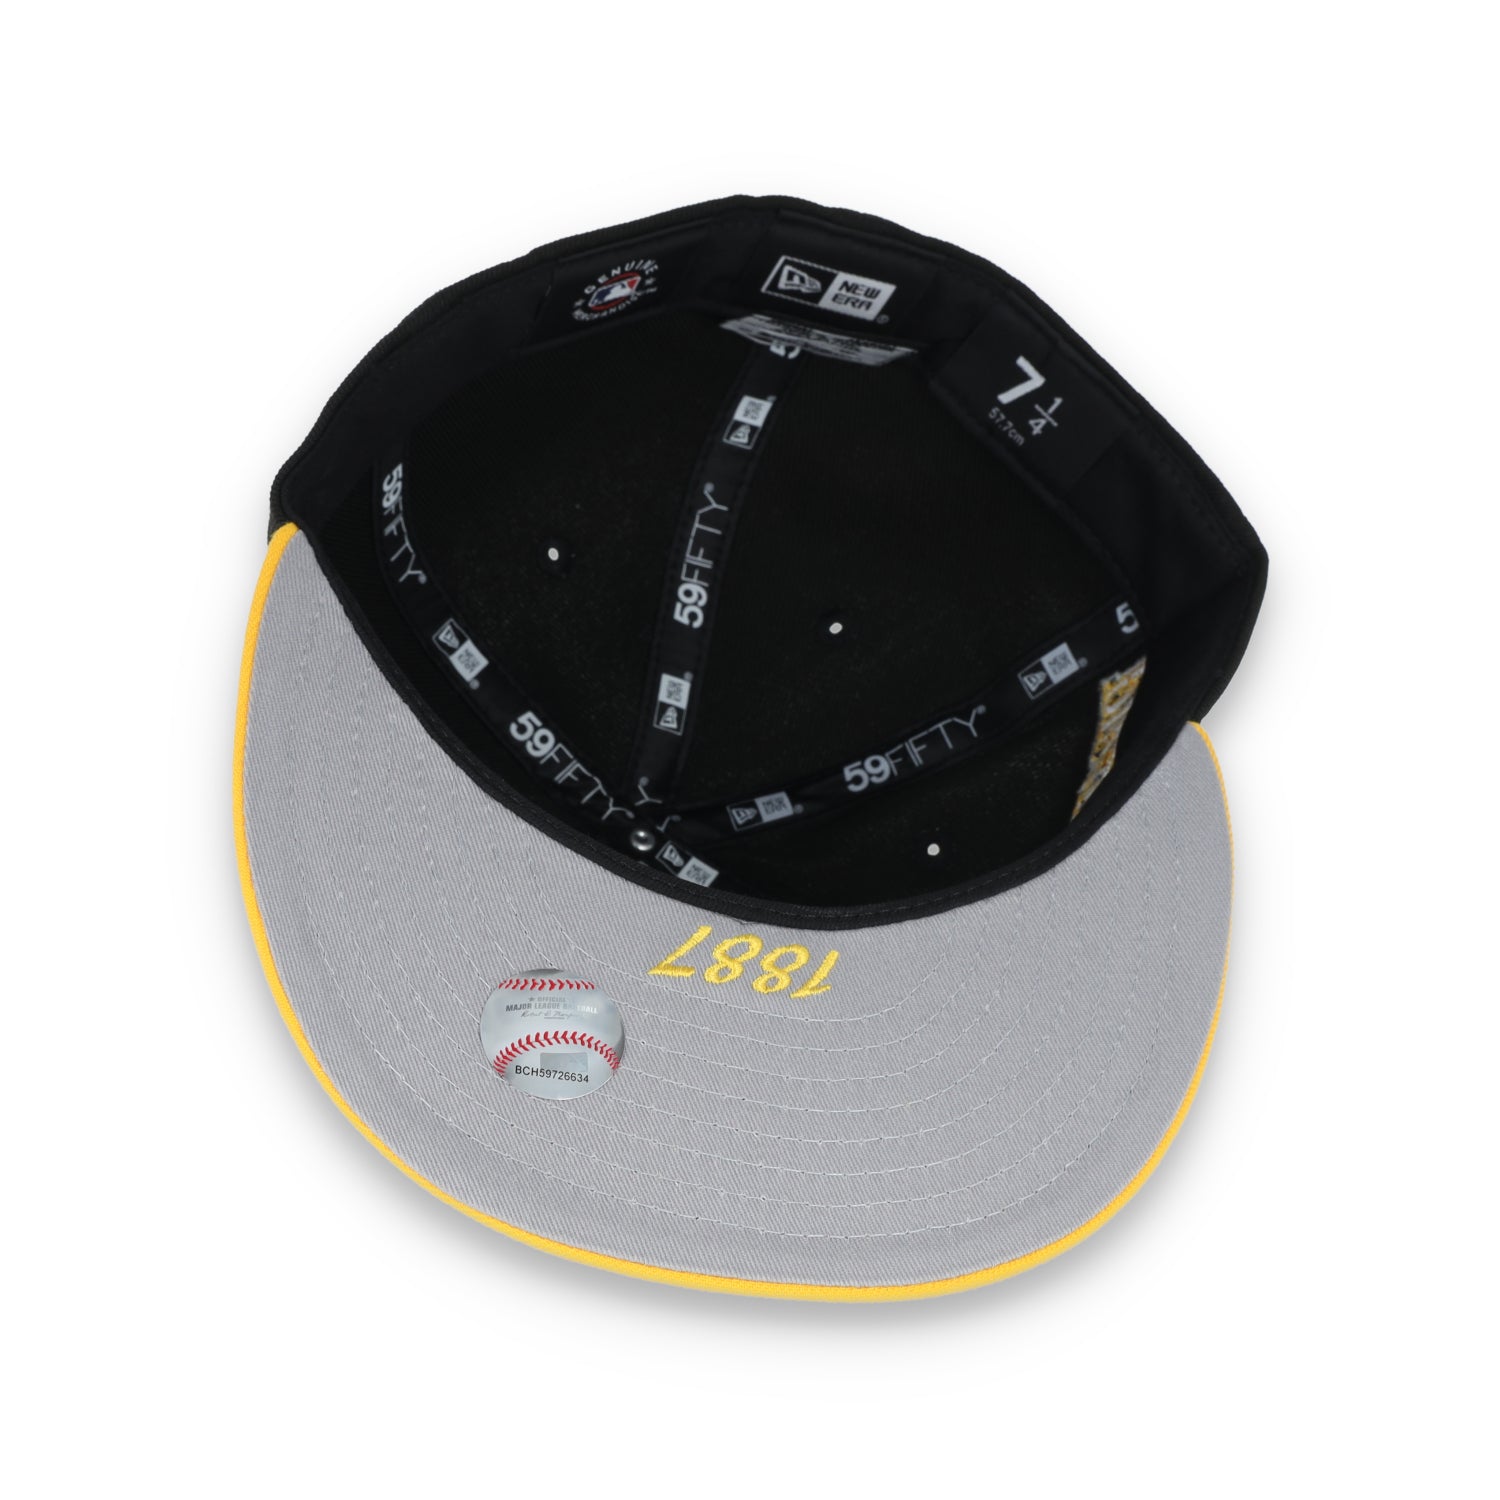 New Era Pittsburgh Pirates NL Central 59FIFTY fitted-Black/Yellow